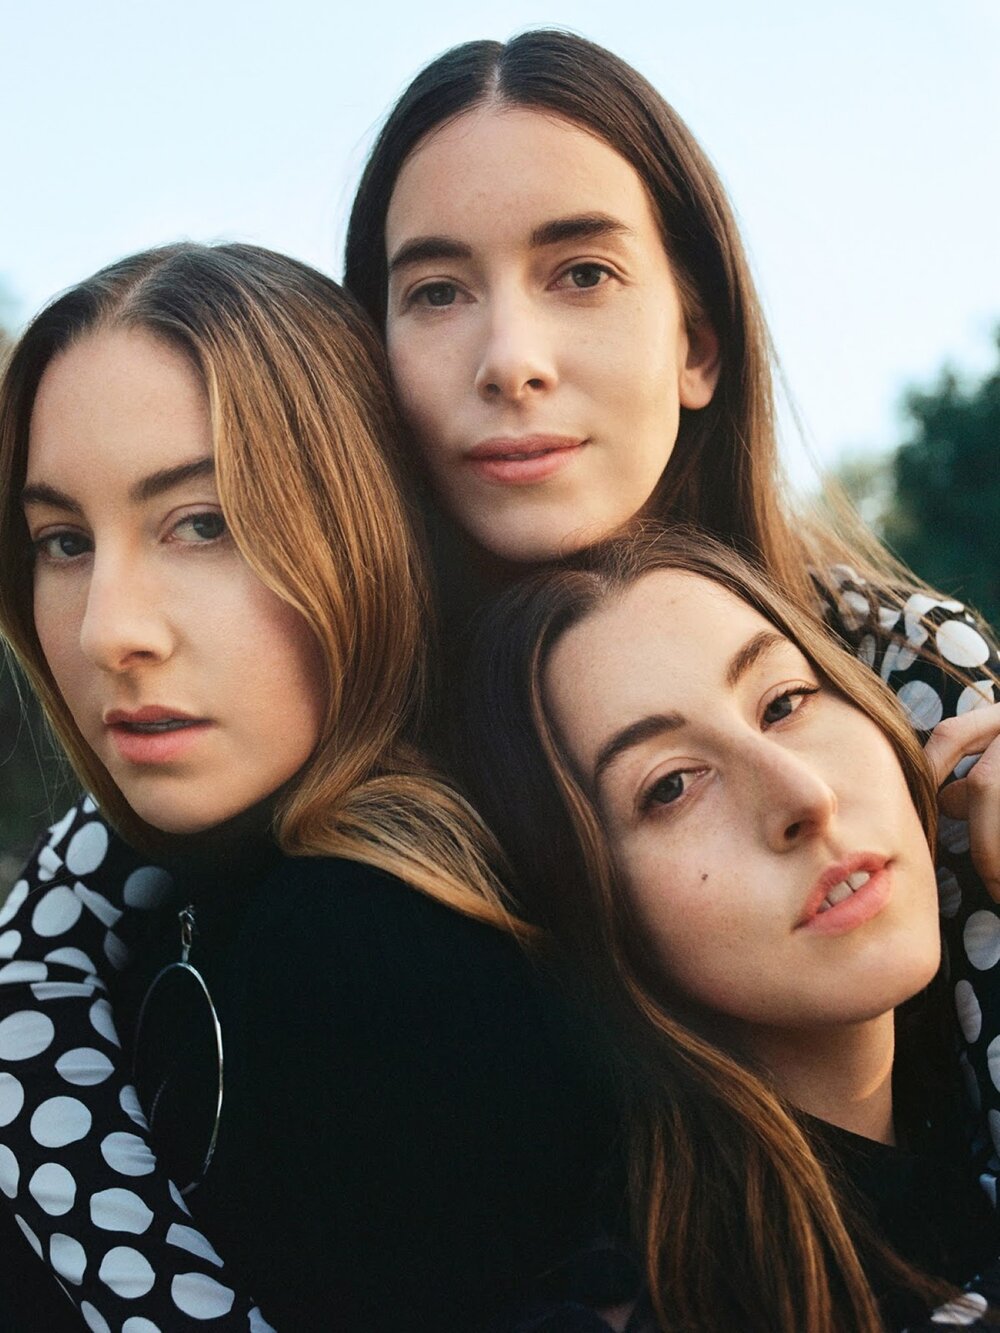 "Up From a Dream" by HAIM